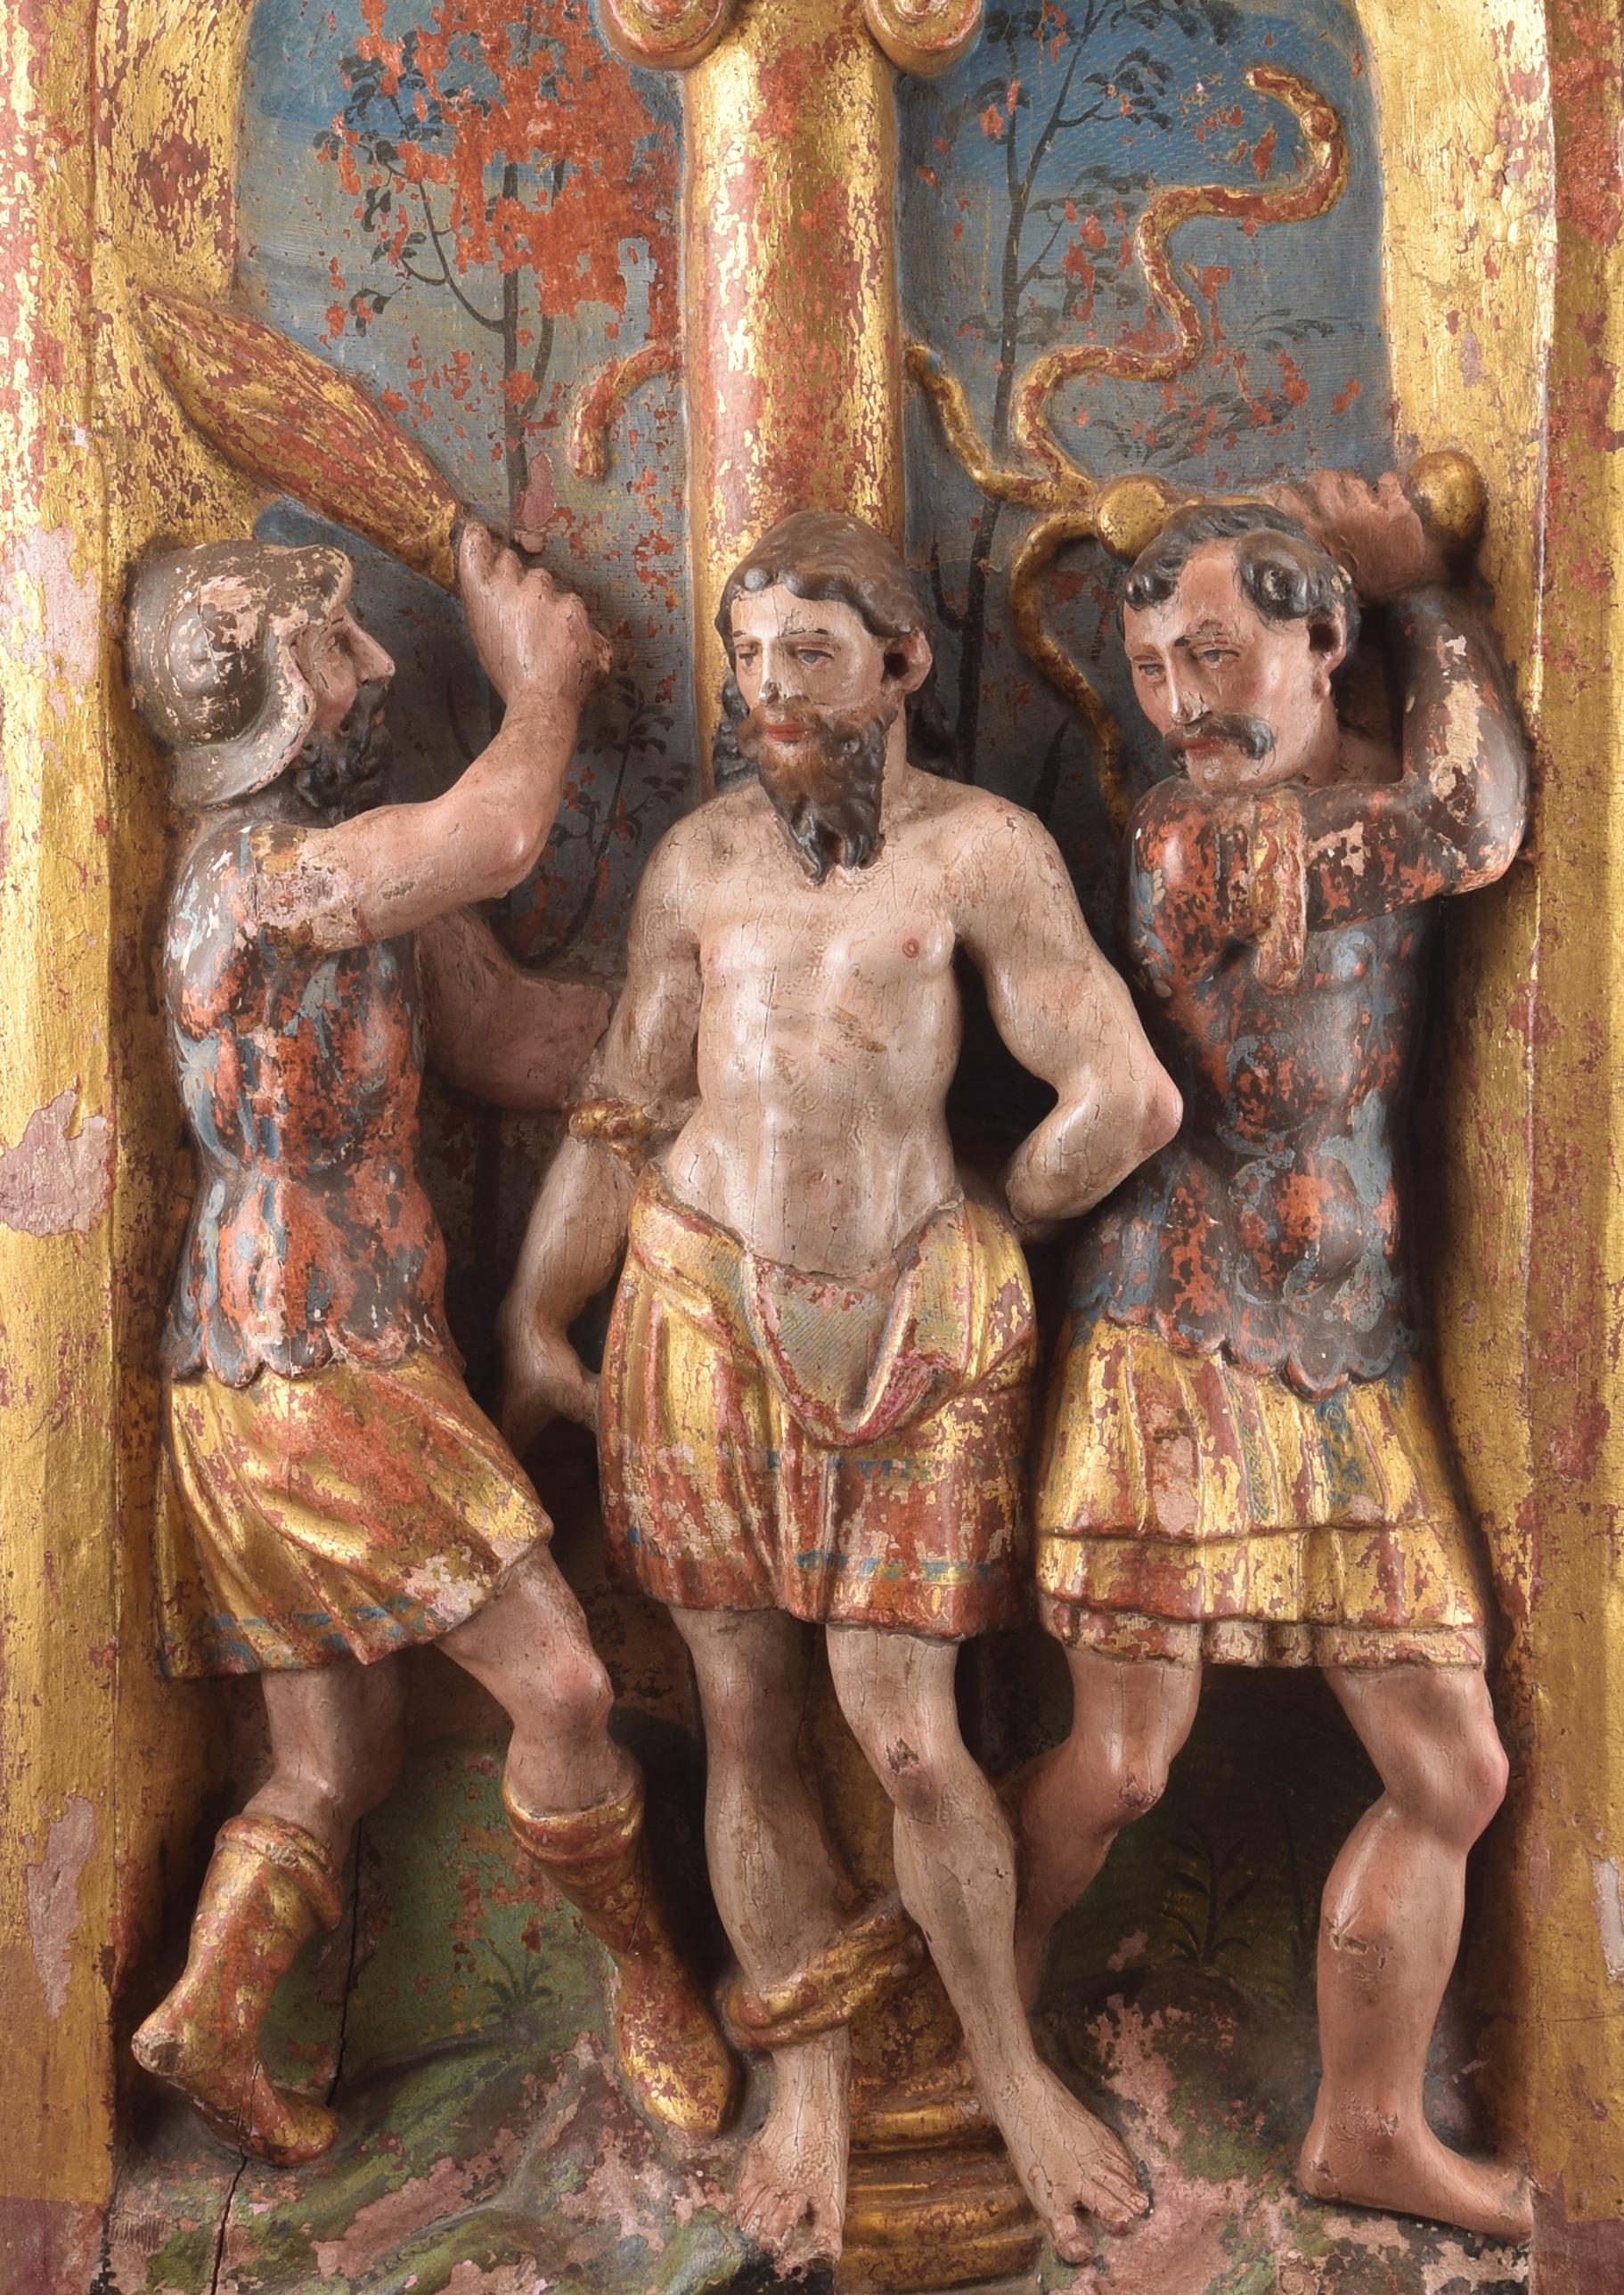 Thanks to the positions of the characters and the elements they have in their hands, it can be said that one of the panels shows the Flagellation and the other would be The Mocking of Christ (or, more specifically, the moment of the Coronation of